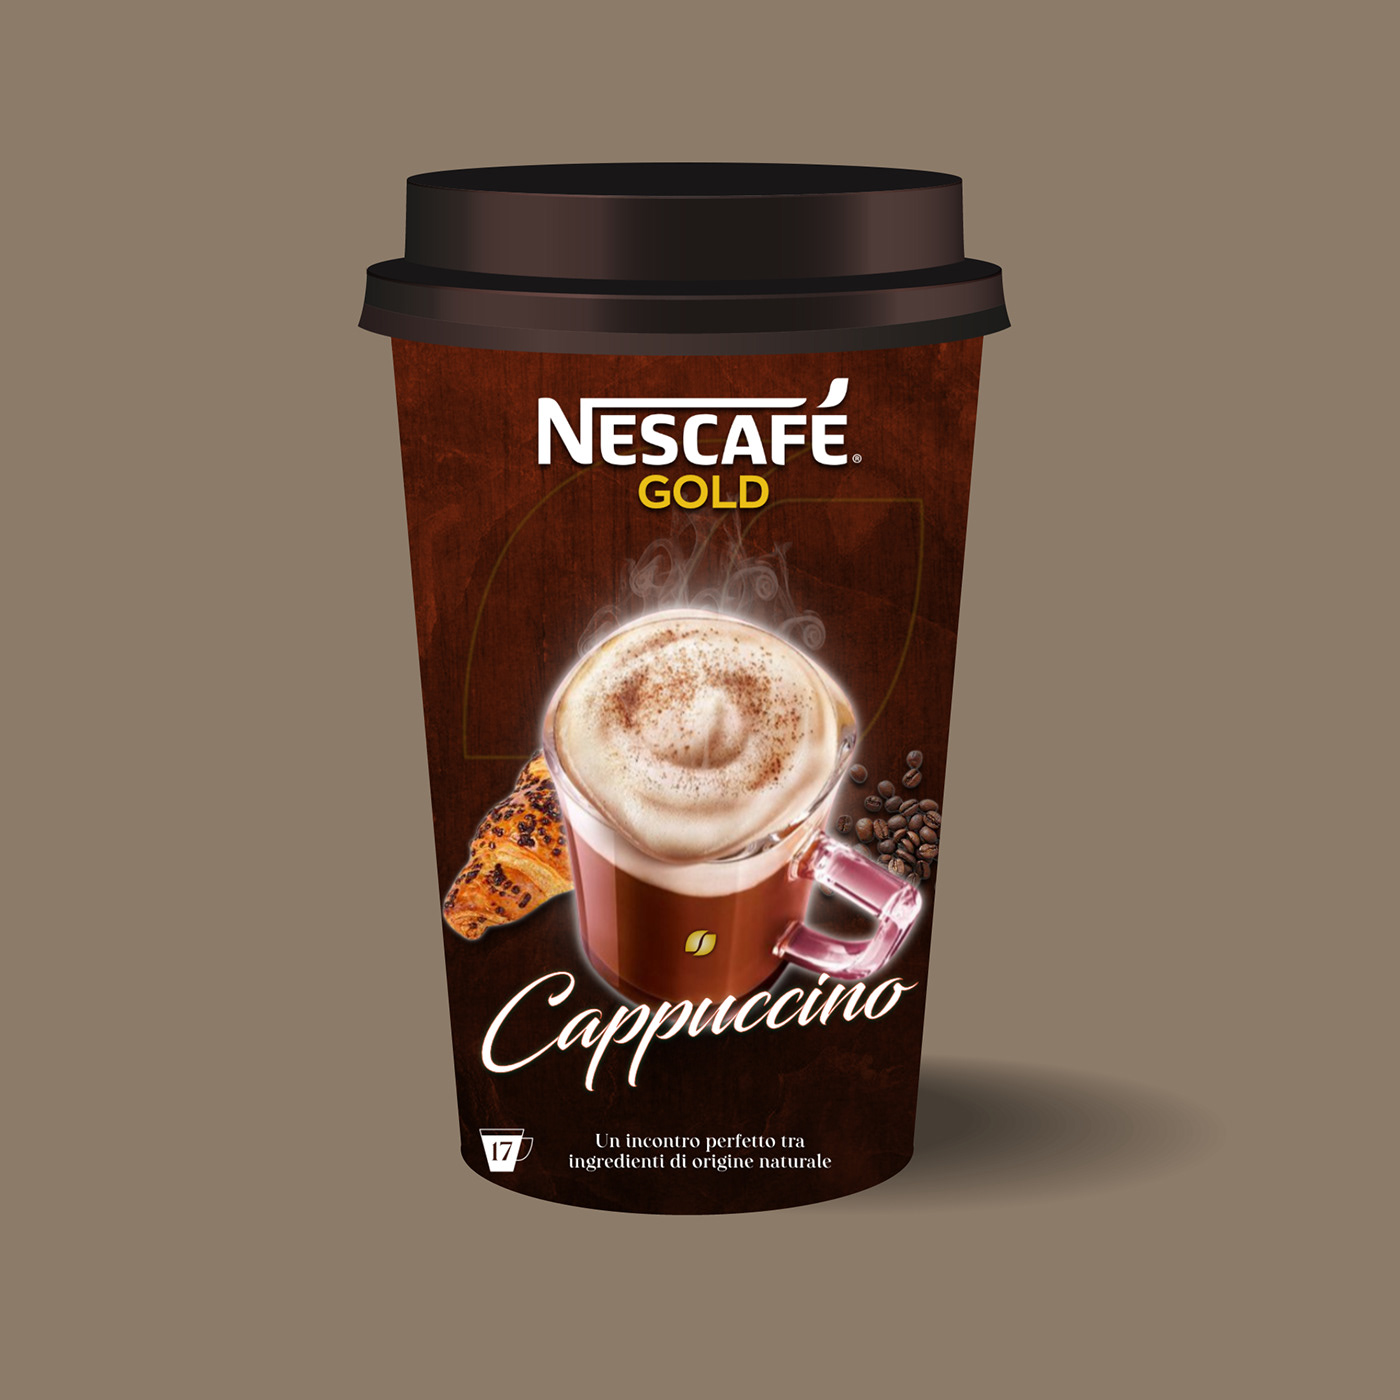 packaging design Labeldesign Label Packaging graphic design  coffeedesign cappuccino nescafe design labelpackaging